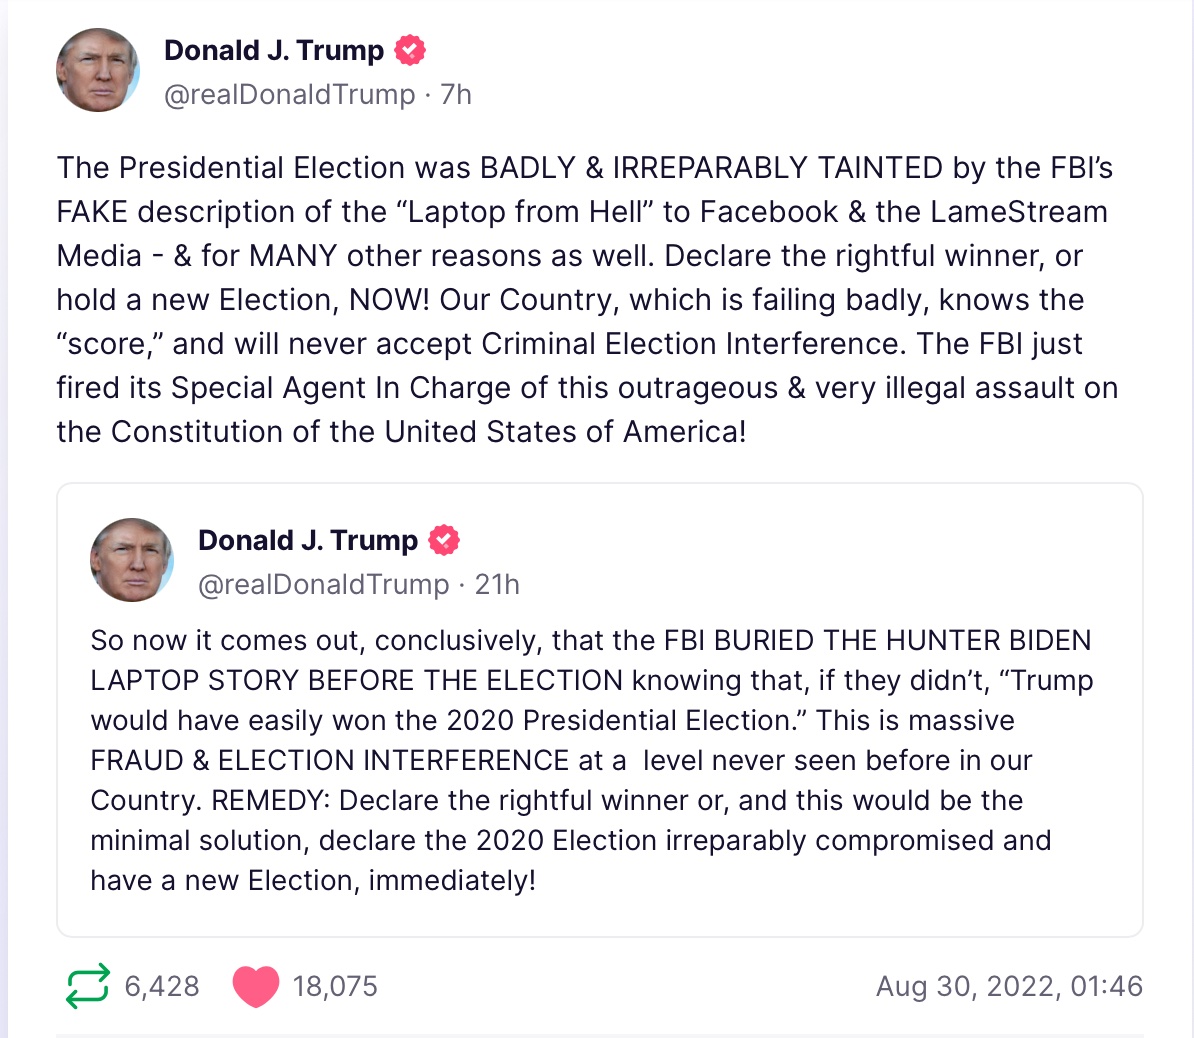 Trump freaks out in unreadable posts 🤪